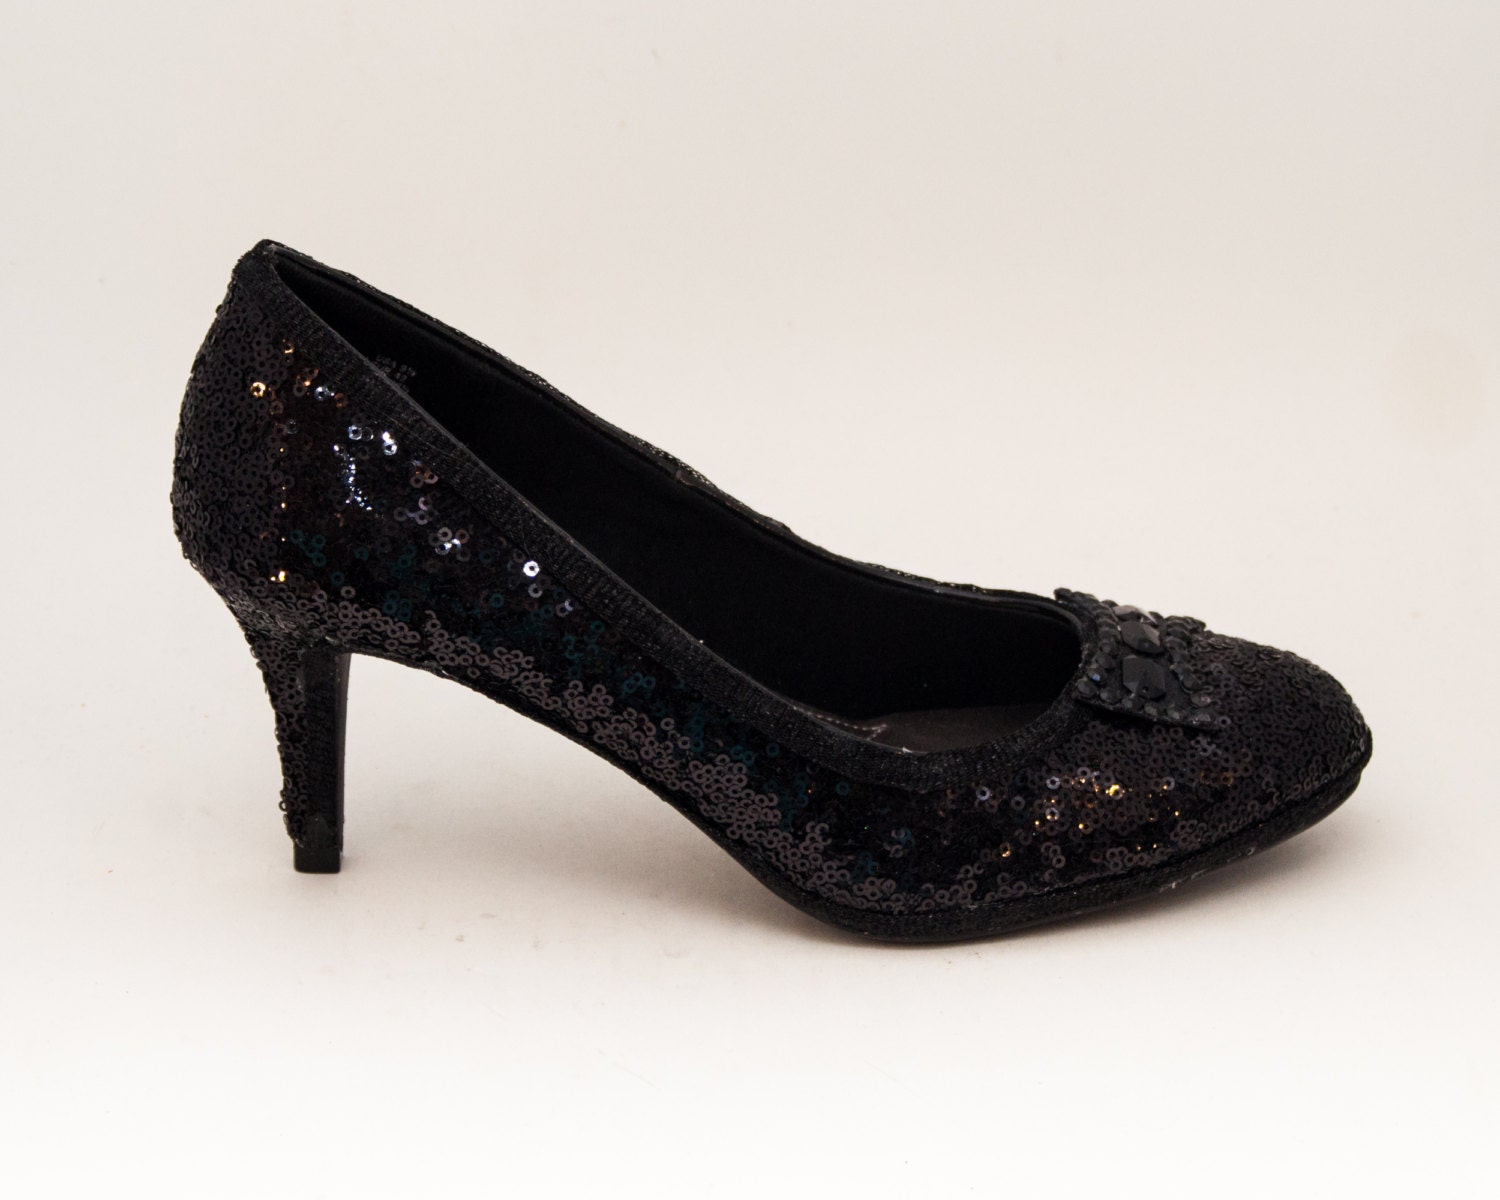 Tiny Sequin Starlight 3 Inch High Heels Black Pumps with